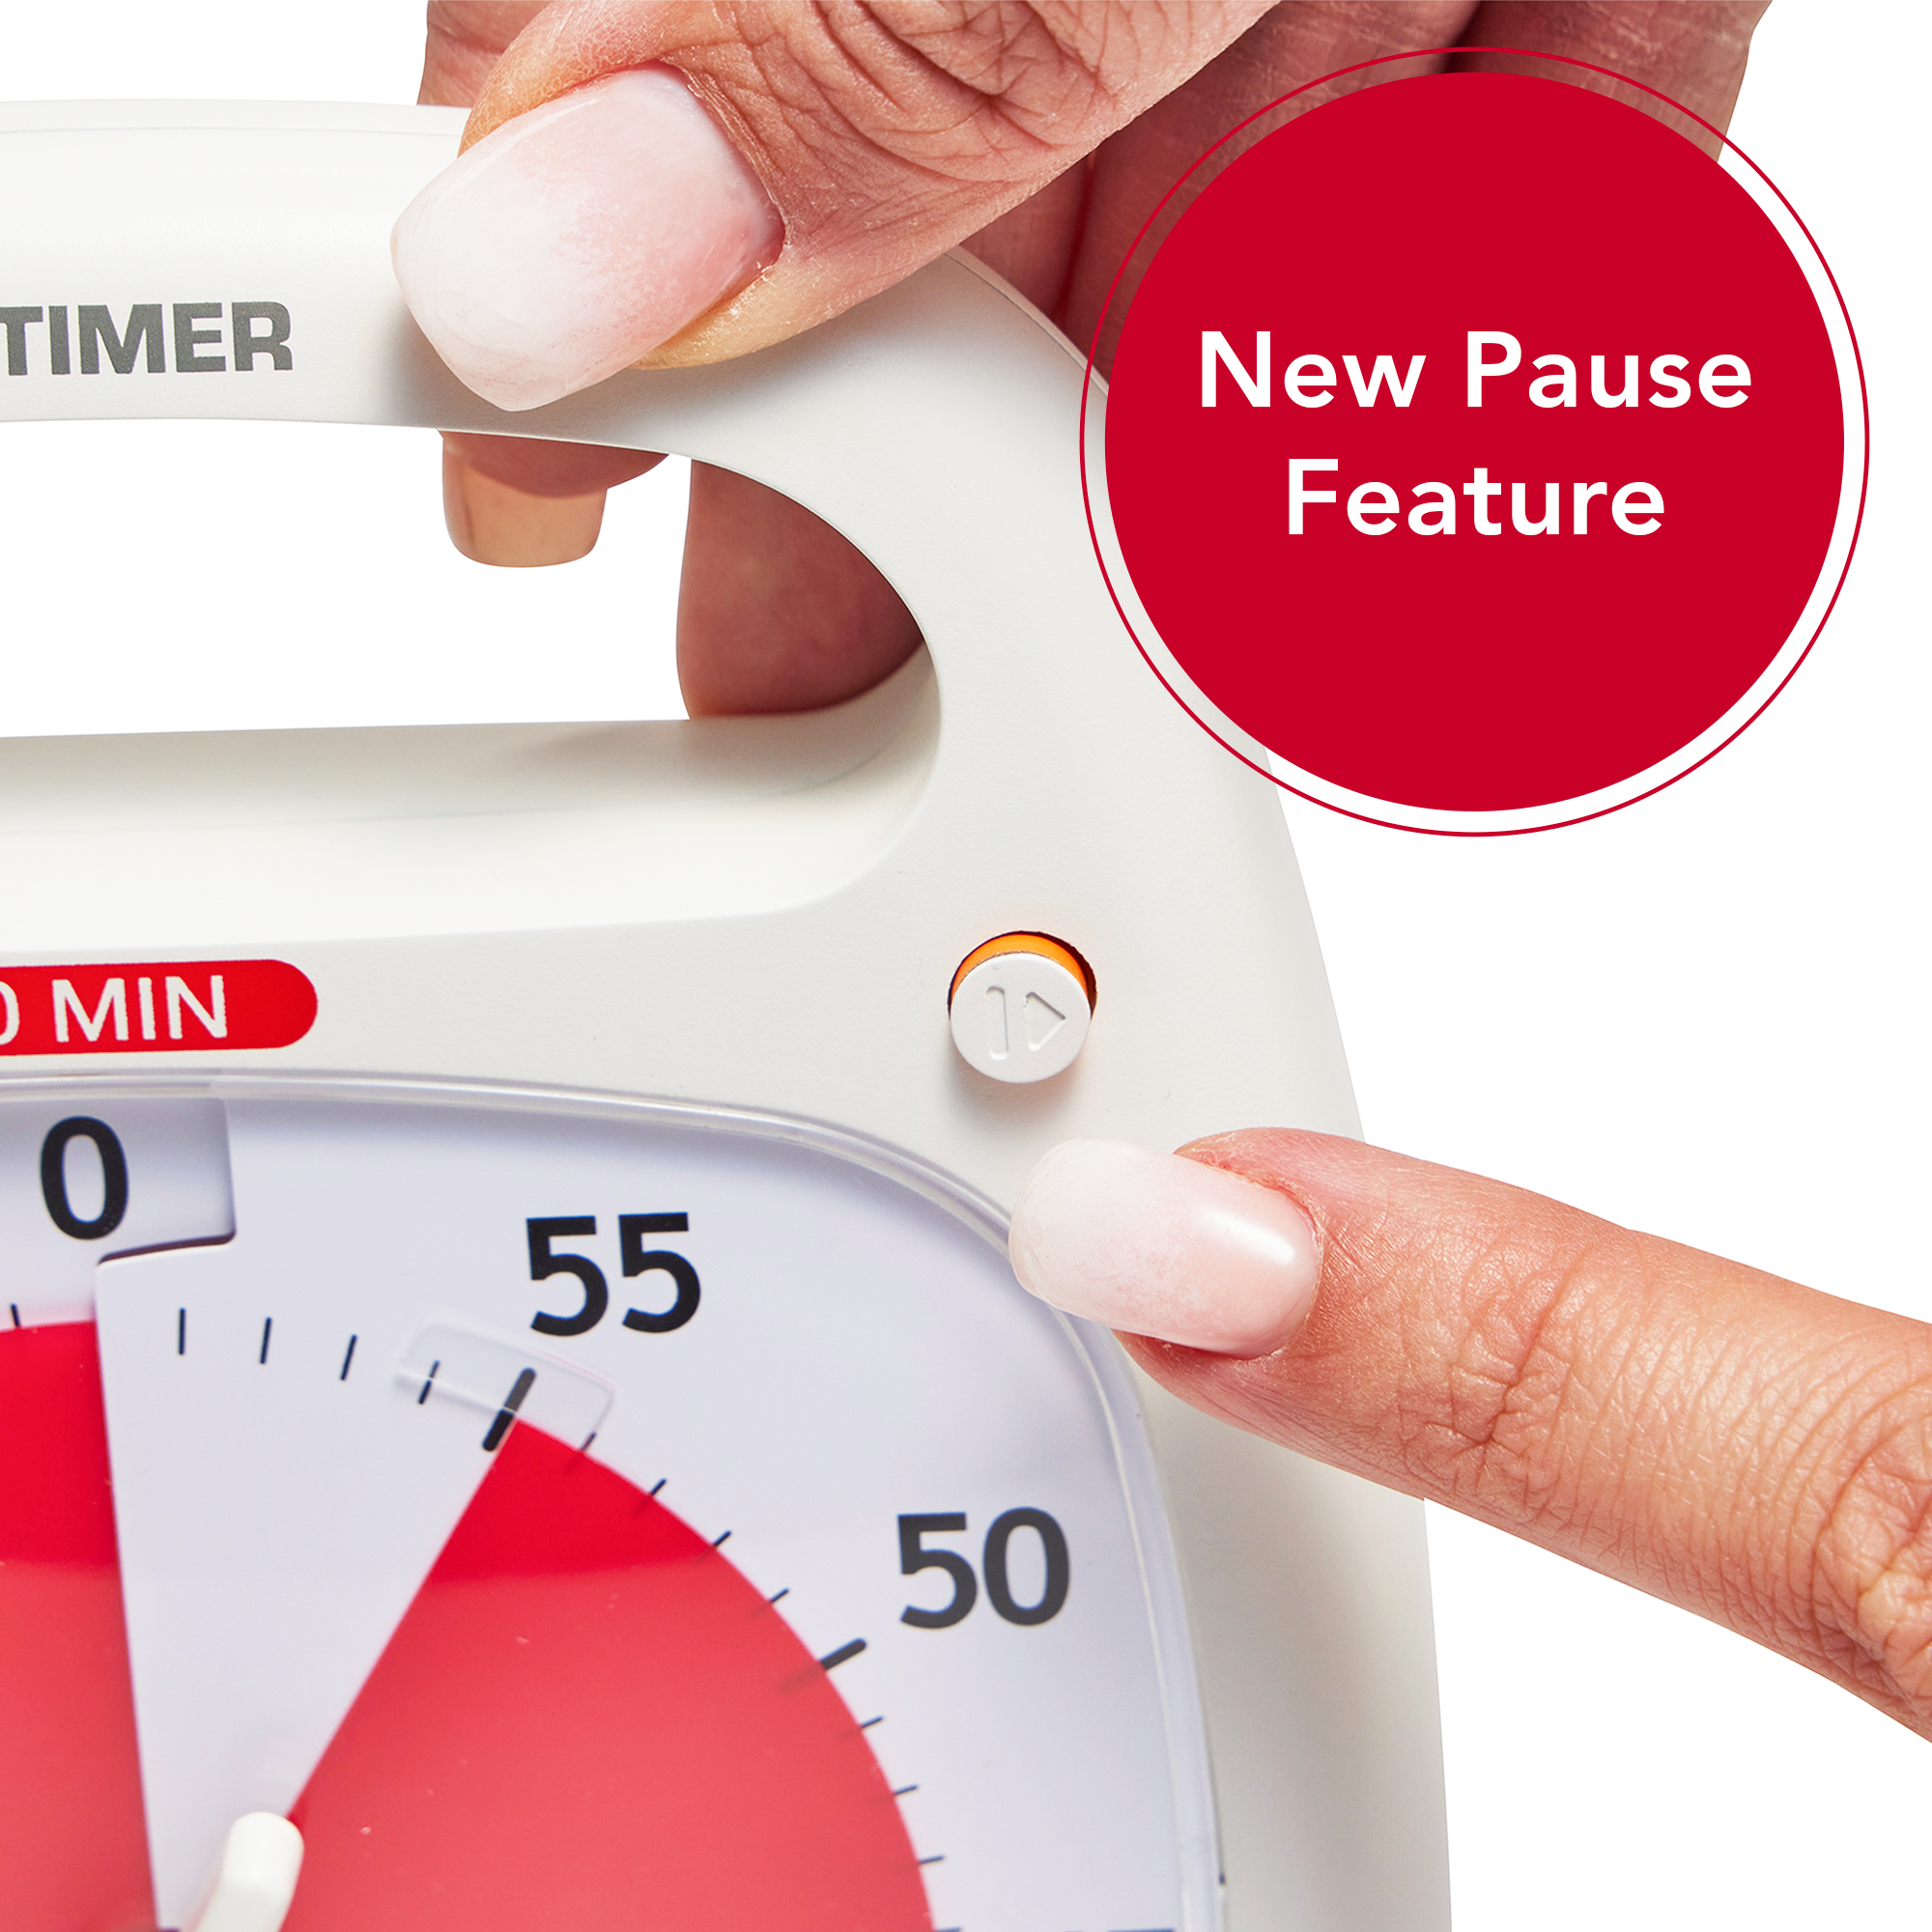 A close up image of the Time Timer PLUS visual timer highlighting the PAUSE button. A hand is about to press the button which is shown popped out with an orange rim.  